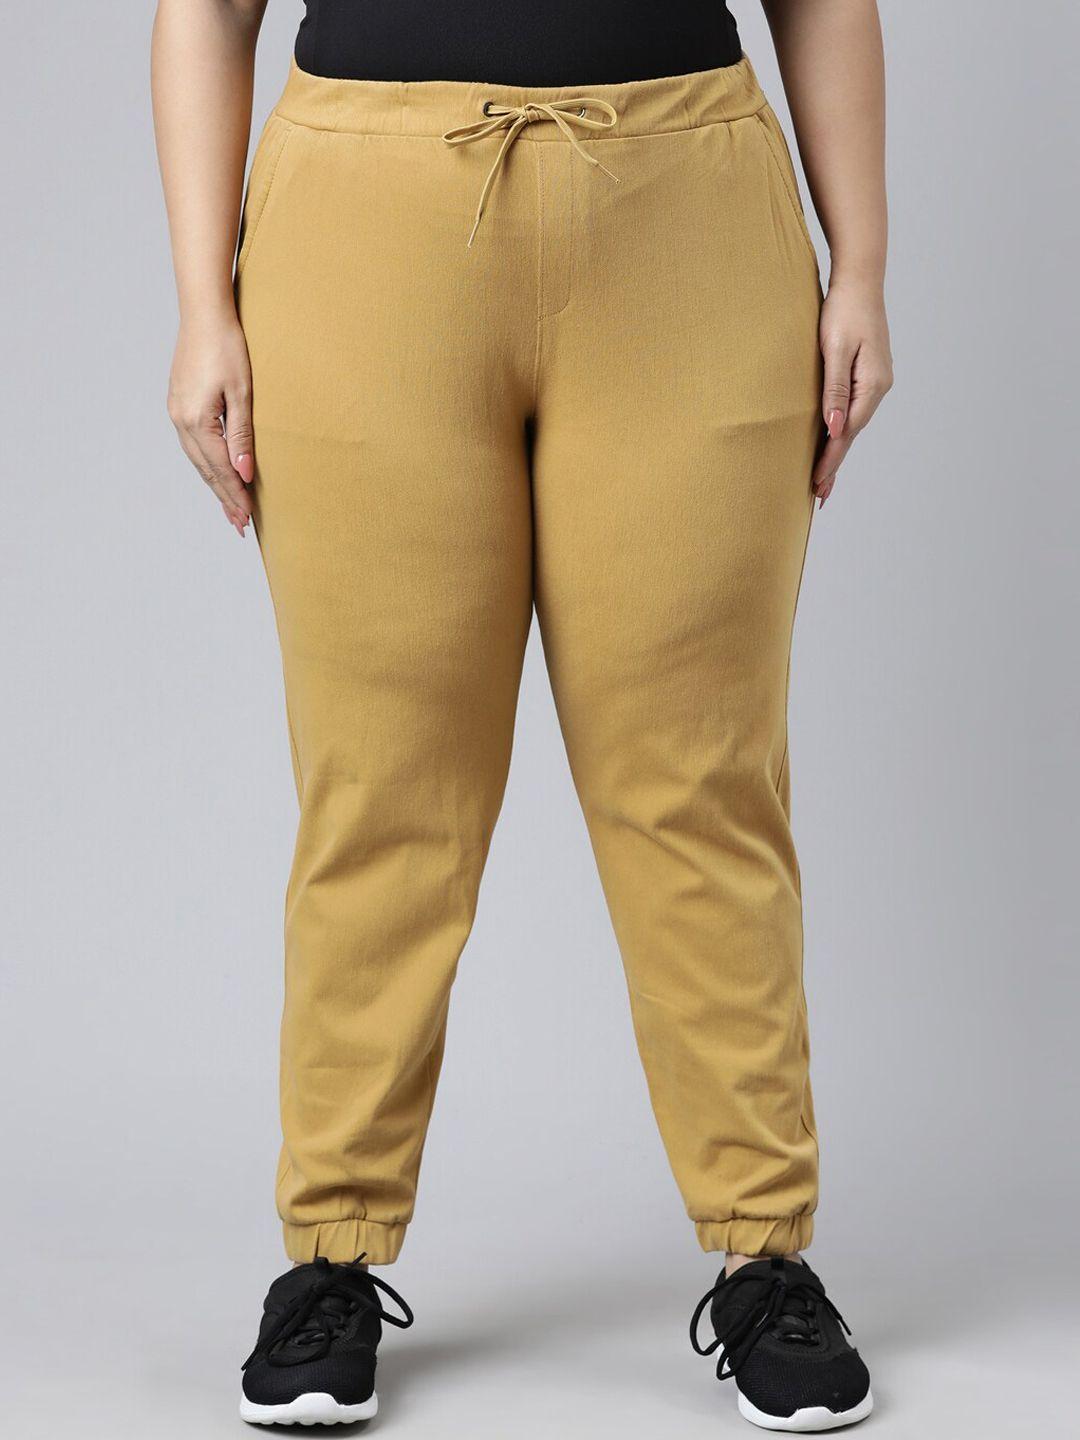 go colors women mustard yellow plus size solid cotton joggers